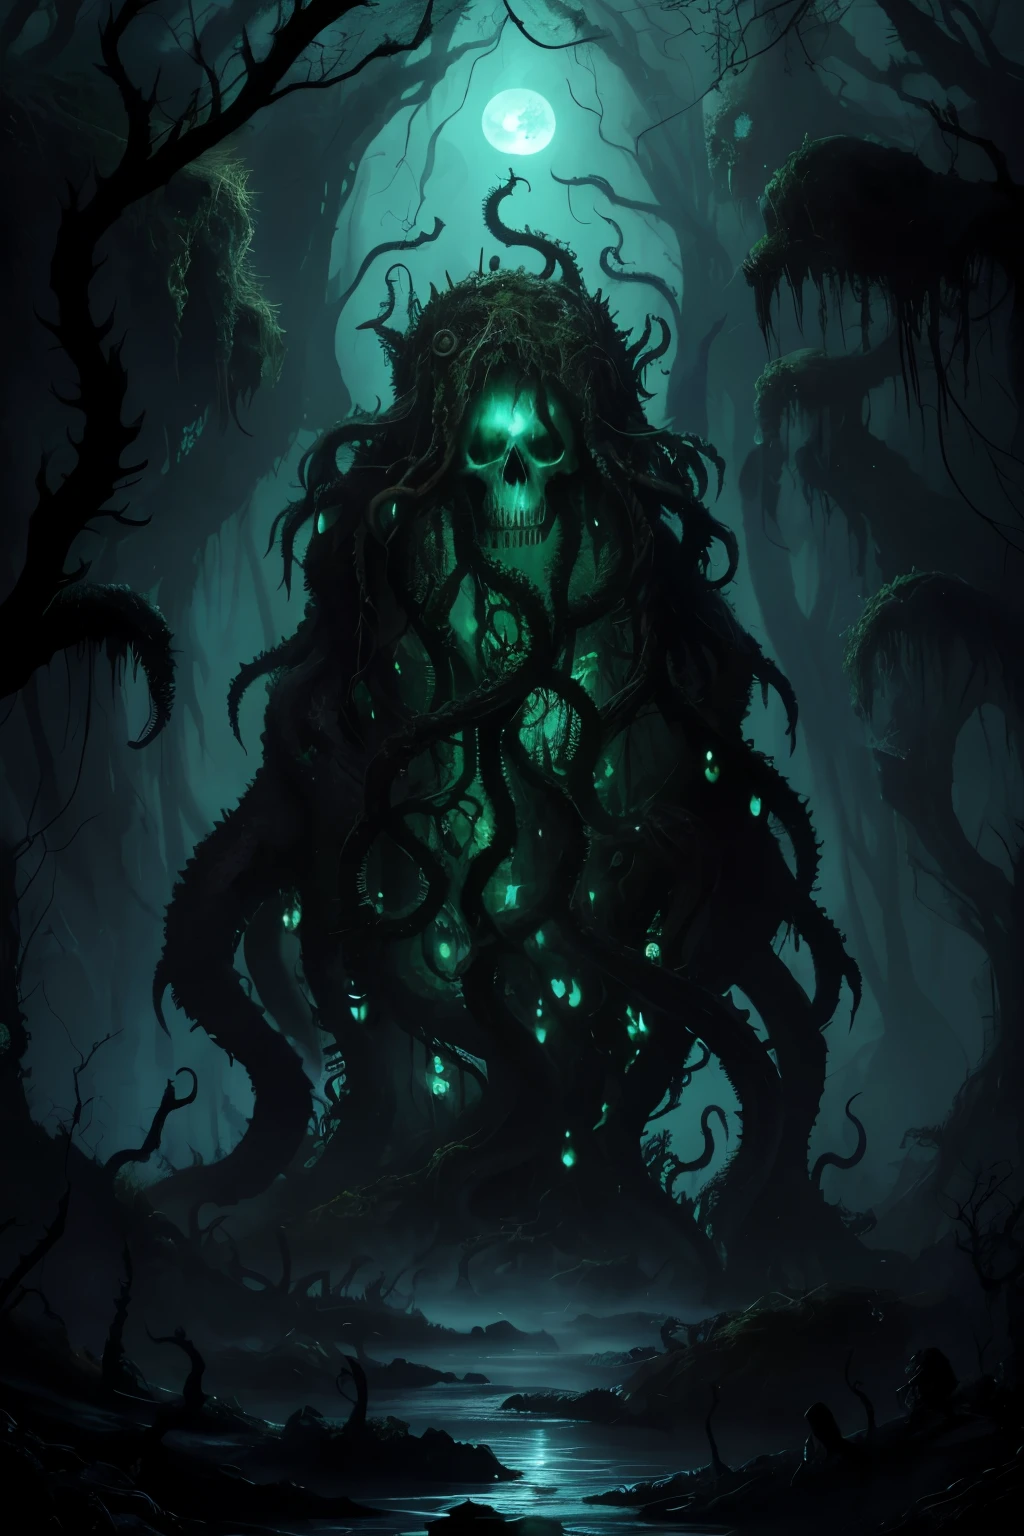 Archaic Lovecraftian entity, Cthulhu, emerges from the murky abyss, adorned with a skull-like visage and sinewy octopus tendrils. The swampy depths, grimy with moss and vines, churn violently as the creature rises, casting a haunting silhouette against the backdrop of fireflies, their ethereal glow illuminating the midnight moonlight, creating an otherworldly and chilling atmosphere. (masterpiece:1.2) (illustration:1.2) (best quality) (detailed) (intricate) (8K) (HDR) (wallpaper)